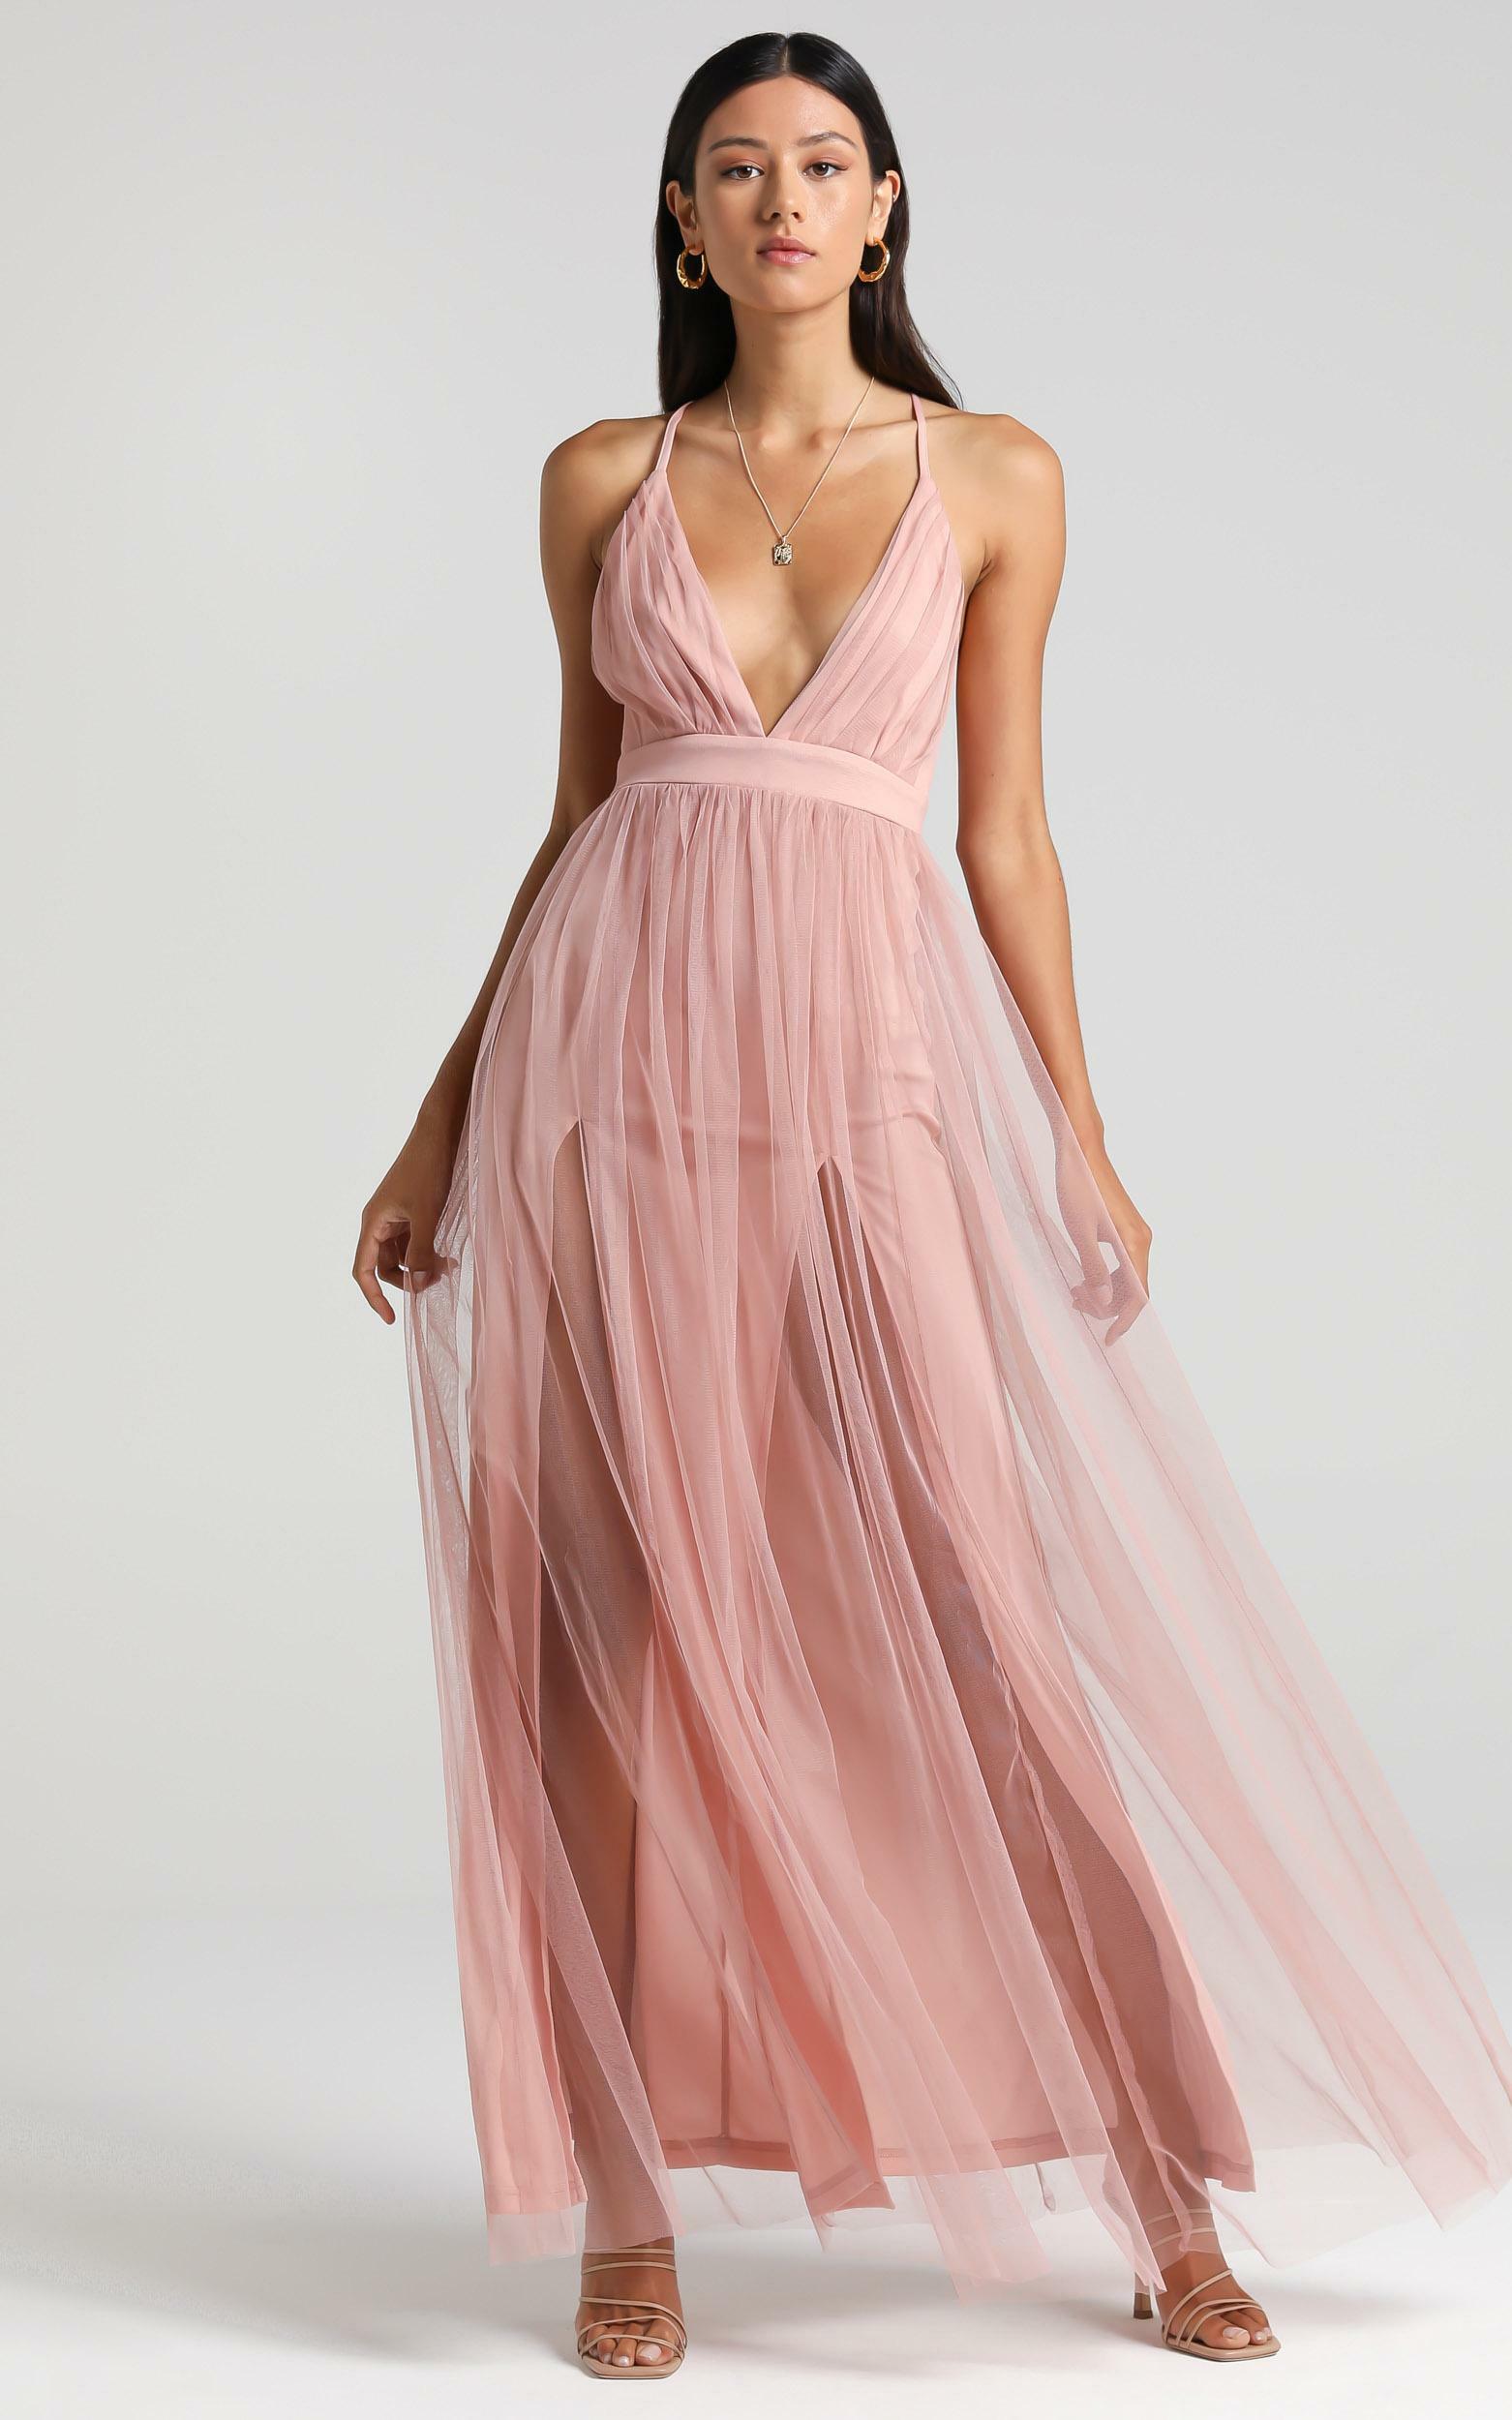 Like A Vision Plunge Maxi Dress in Blush Tulle - 04, PNK2, hi-res image number null